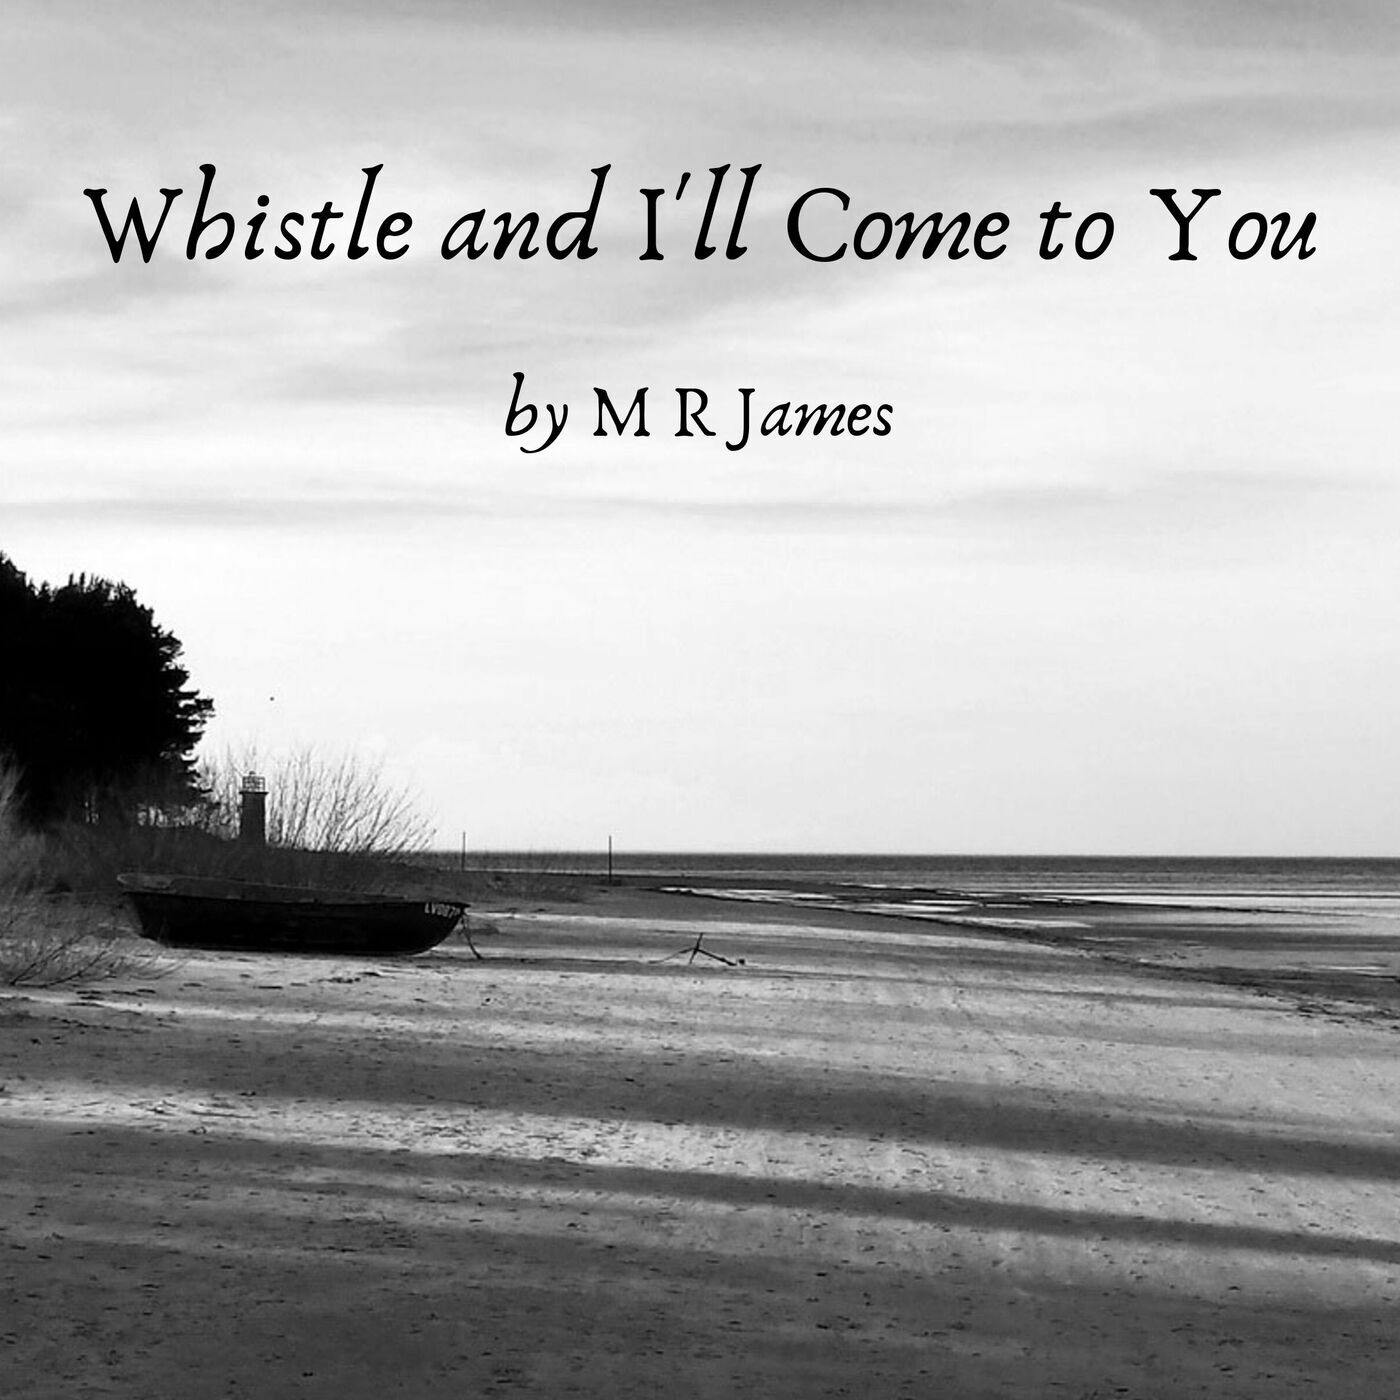 Episode 3: Whistle and I'll Come to You by M R James